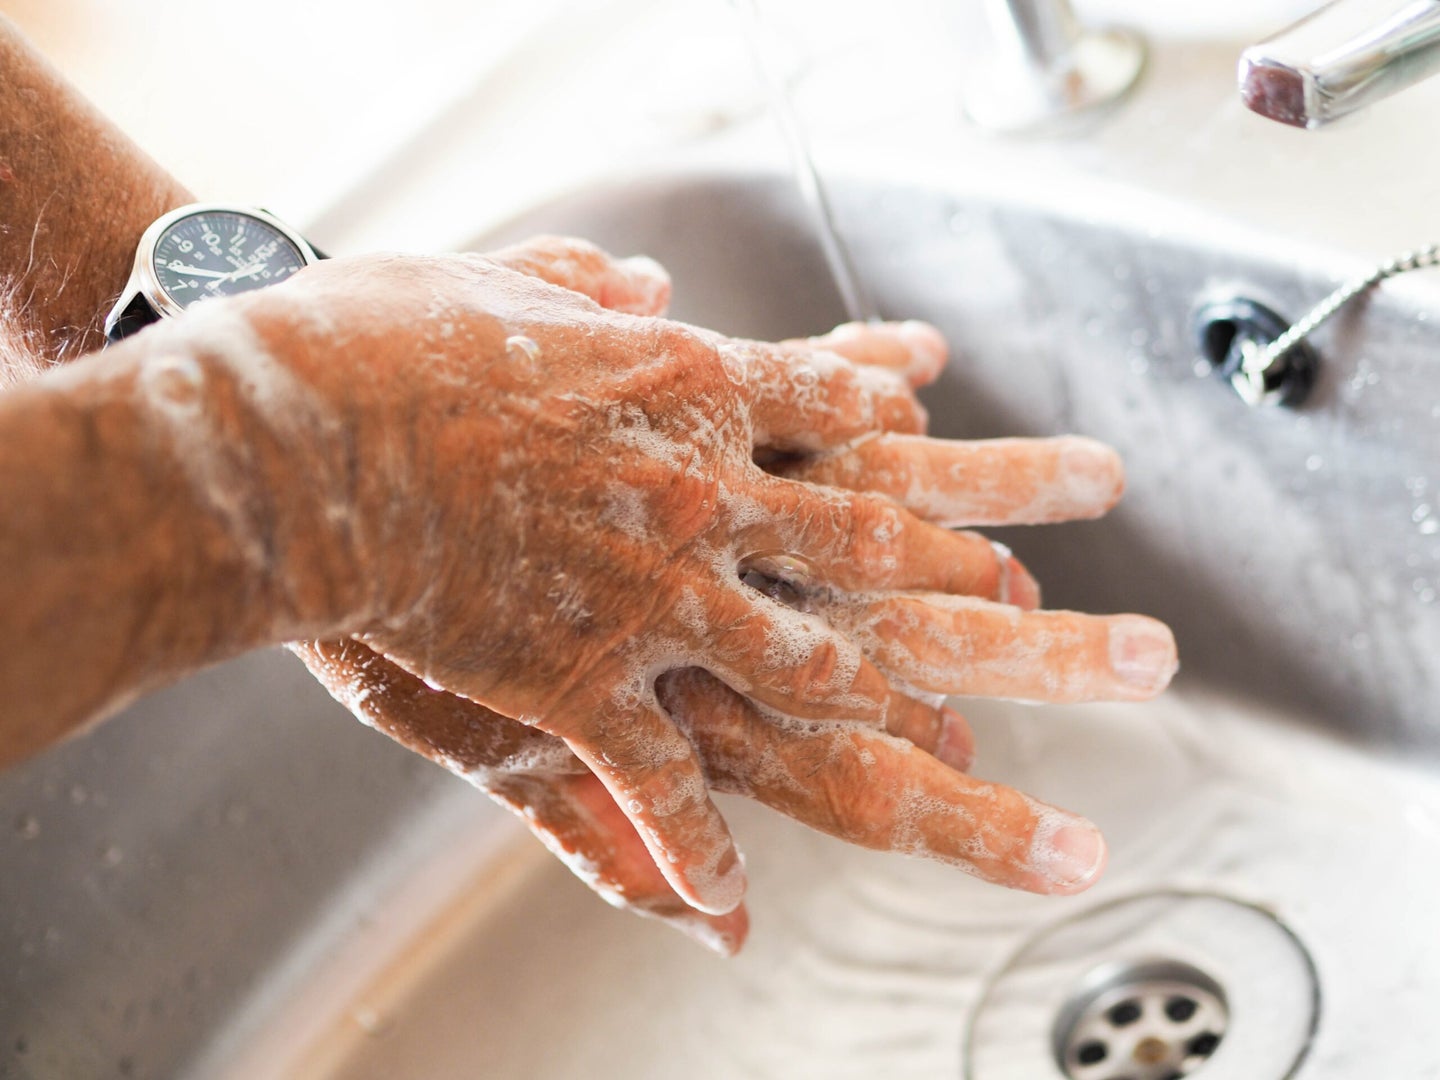 A person washing their hands with soap and water spreads soap between their fingers over the basin of a sink.